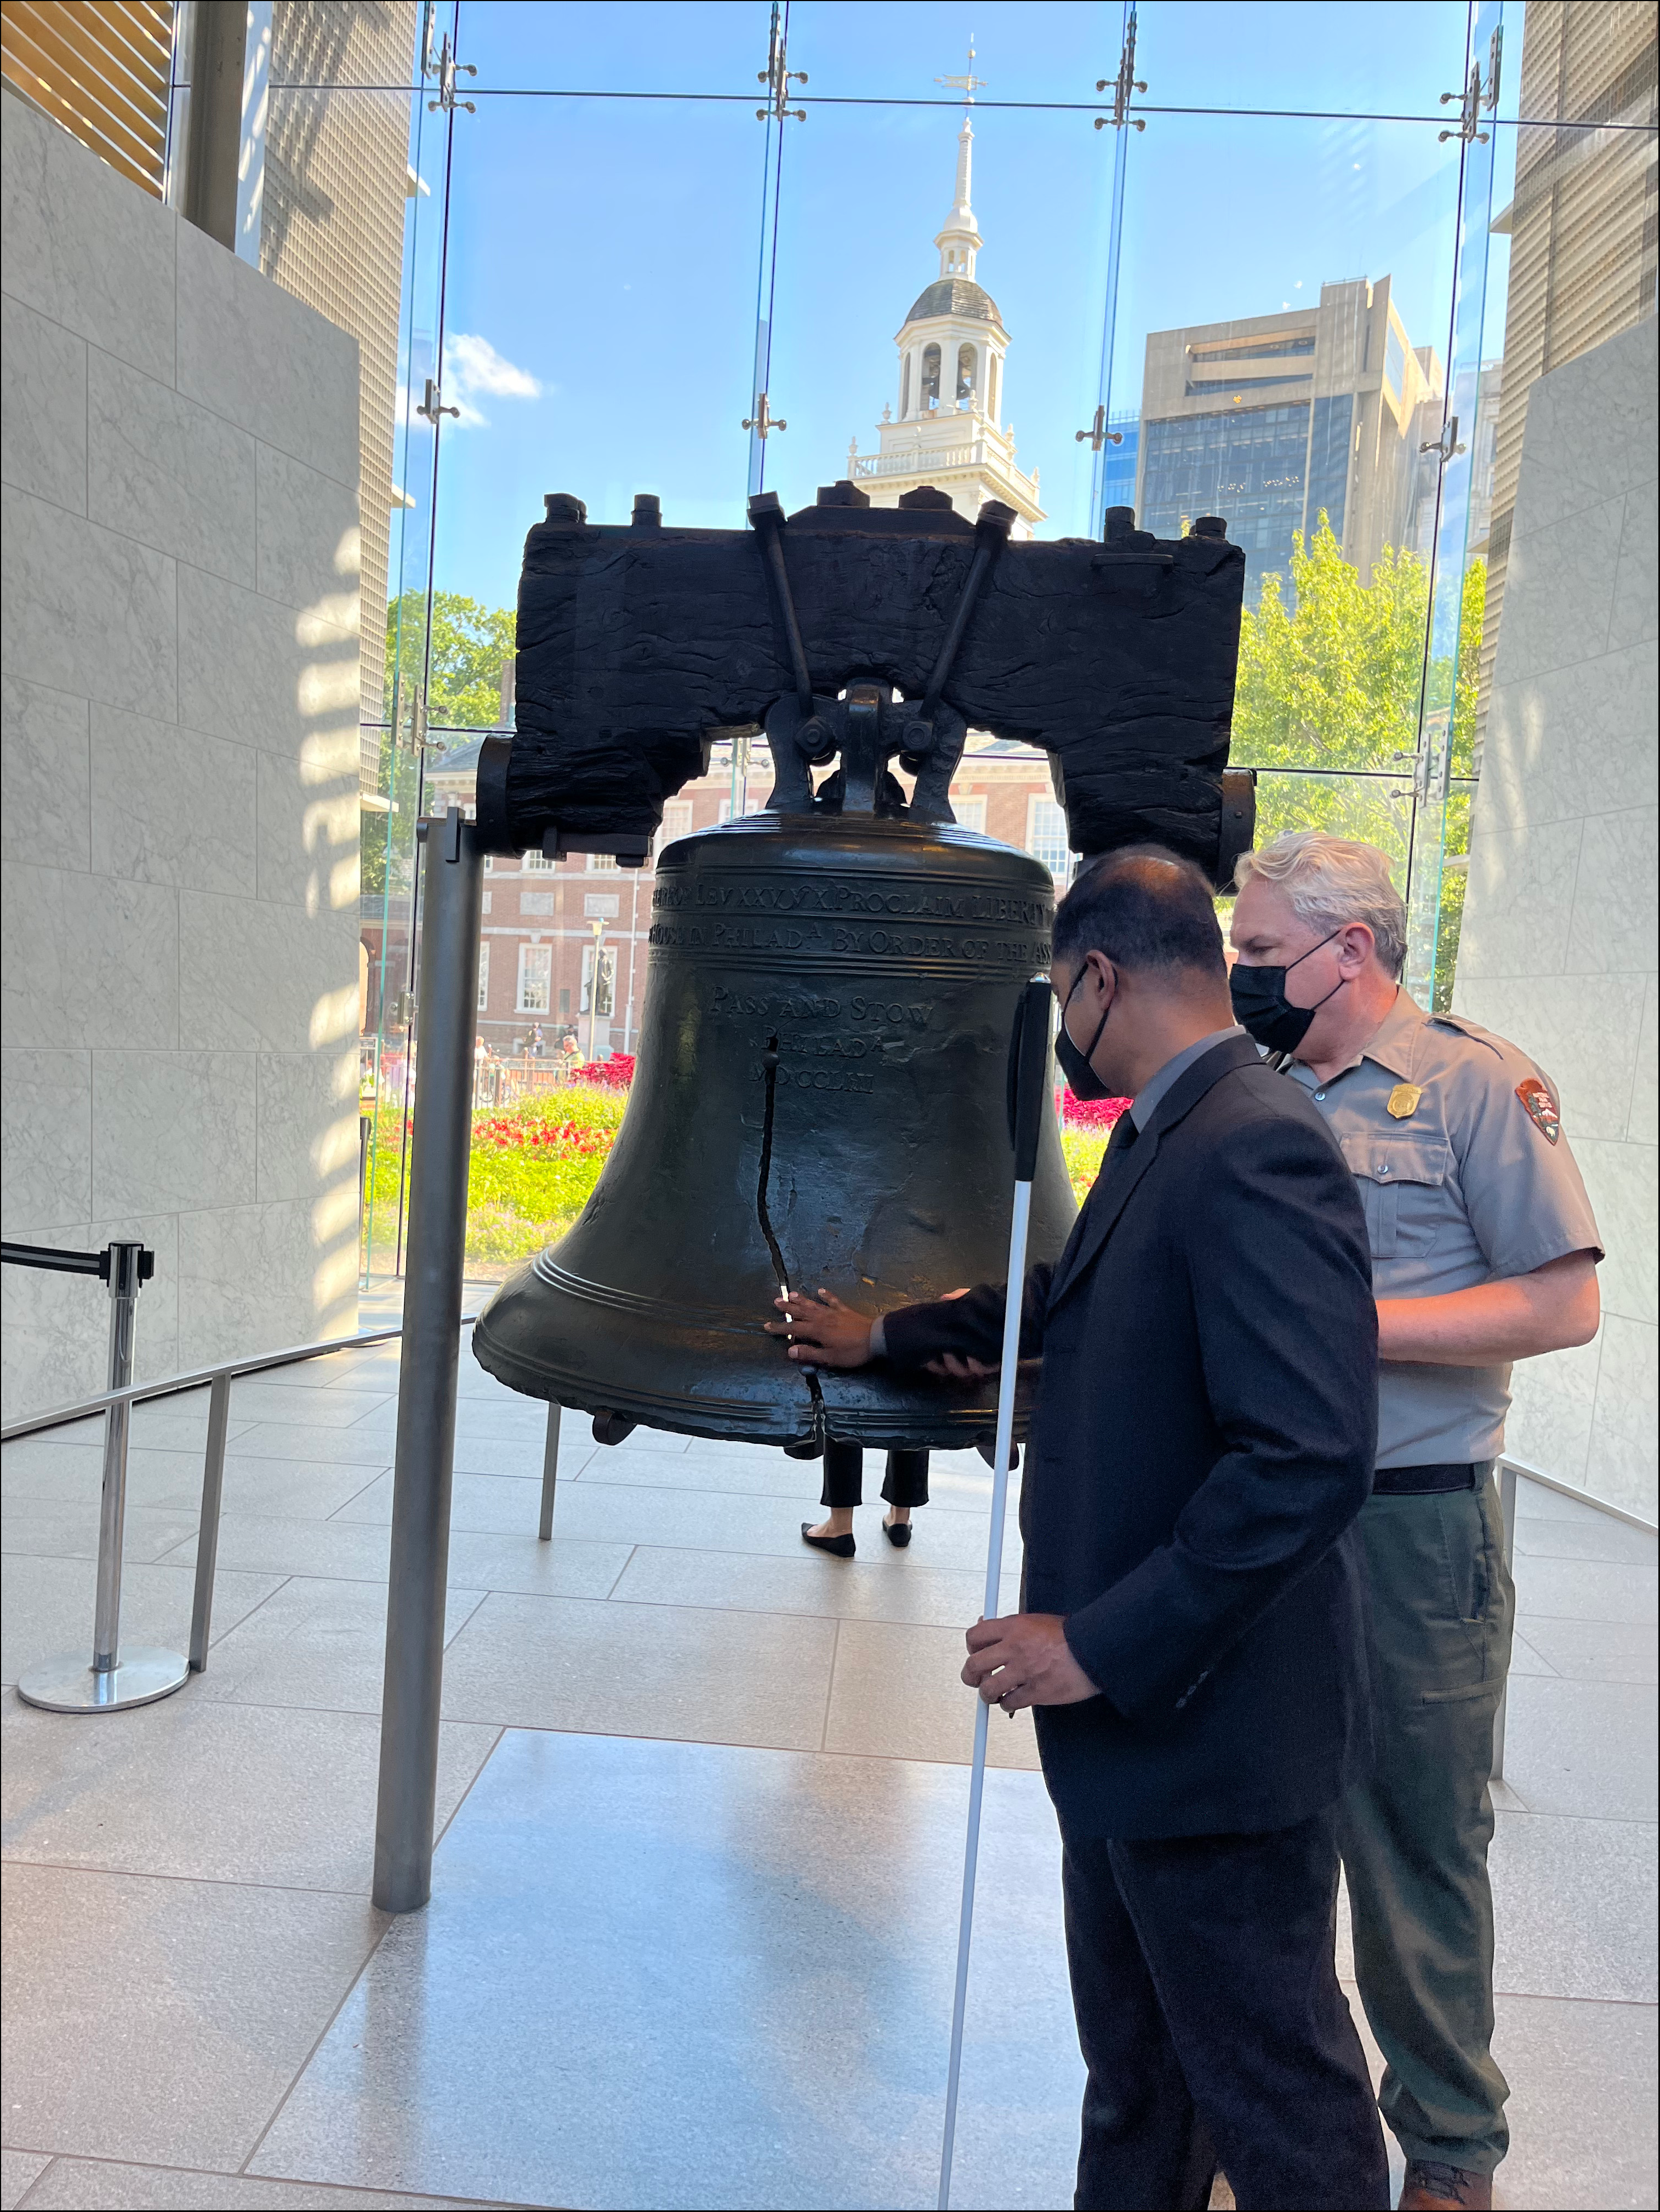 Access Board Executive Director Sachin Pavithran touching the Liberty Bell